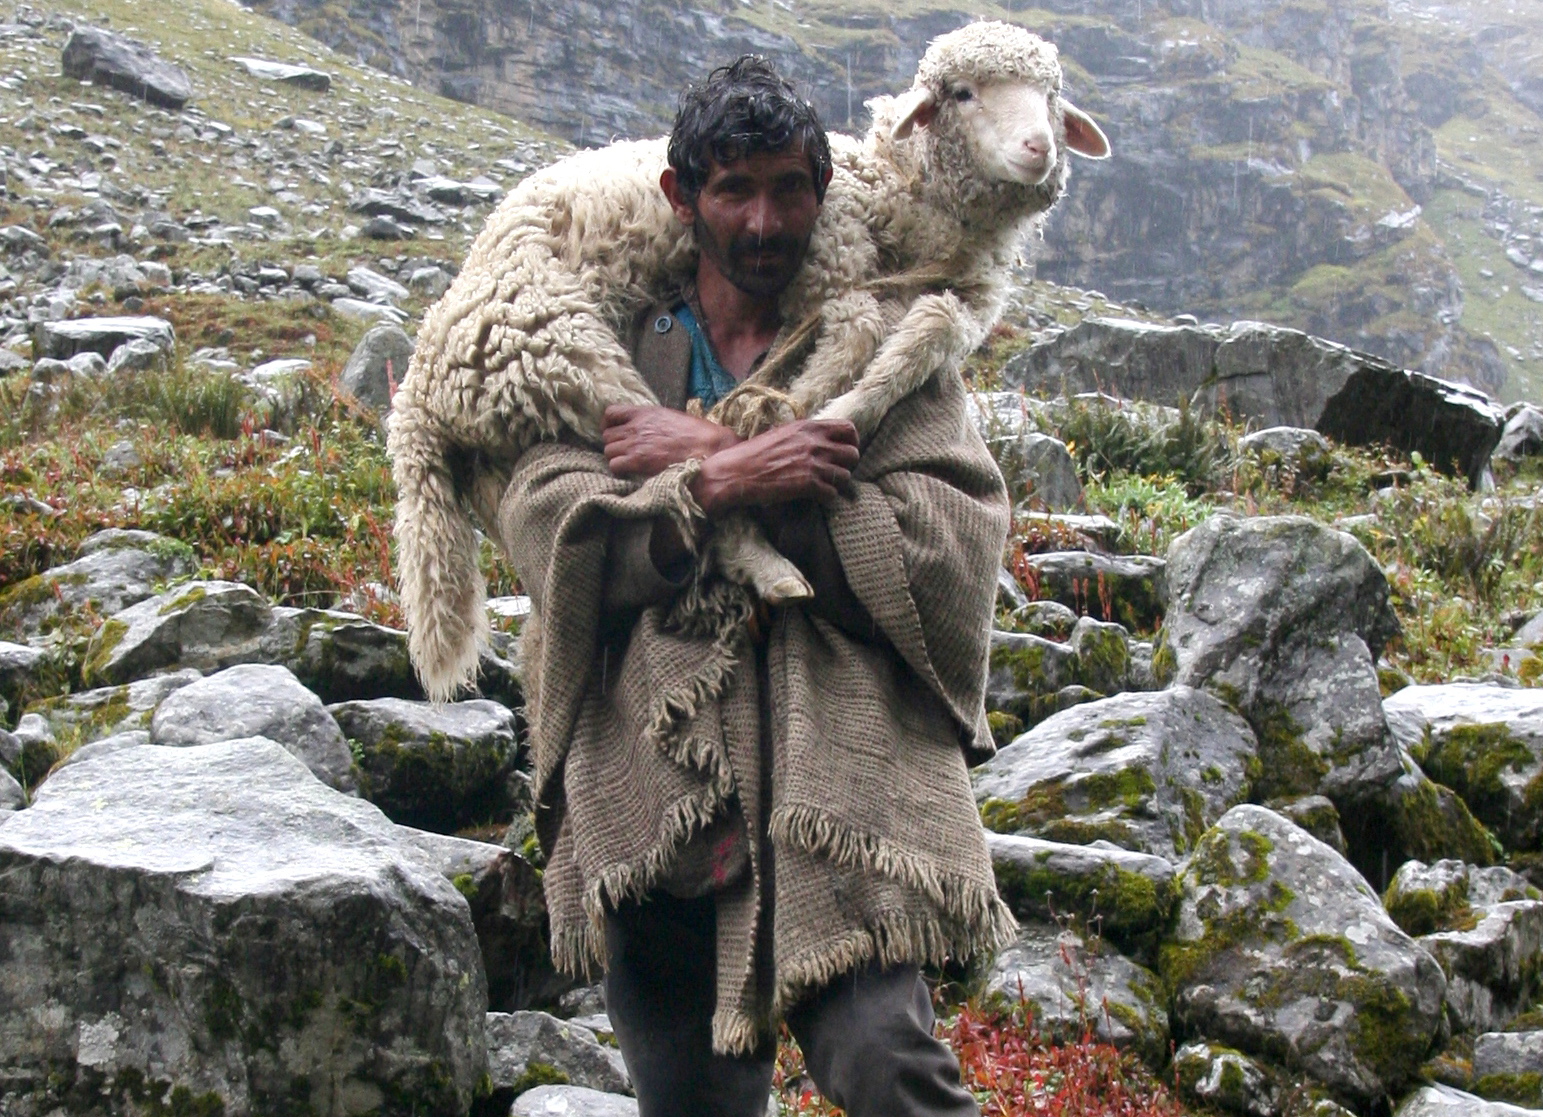 *Friday Footnotes: A Shepherd and the Sheep